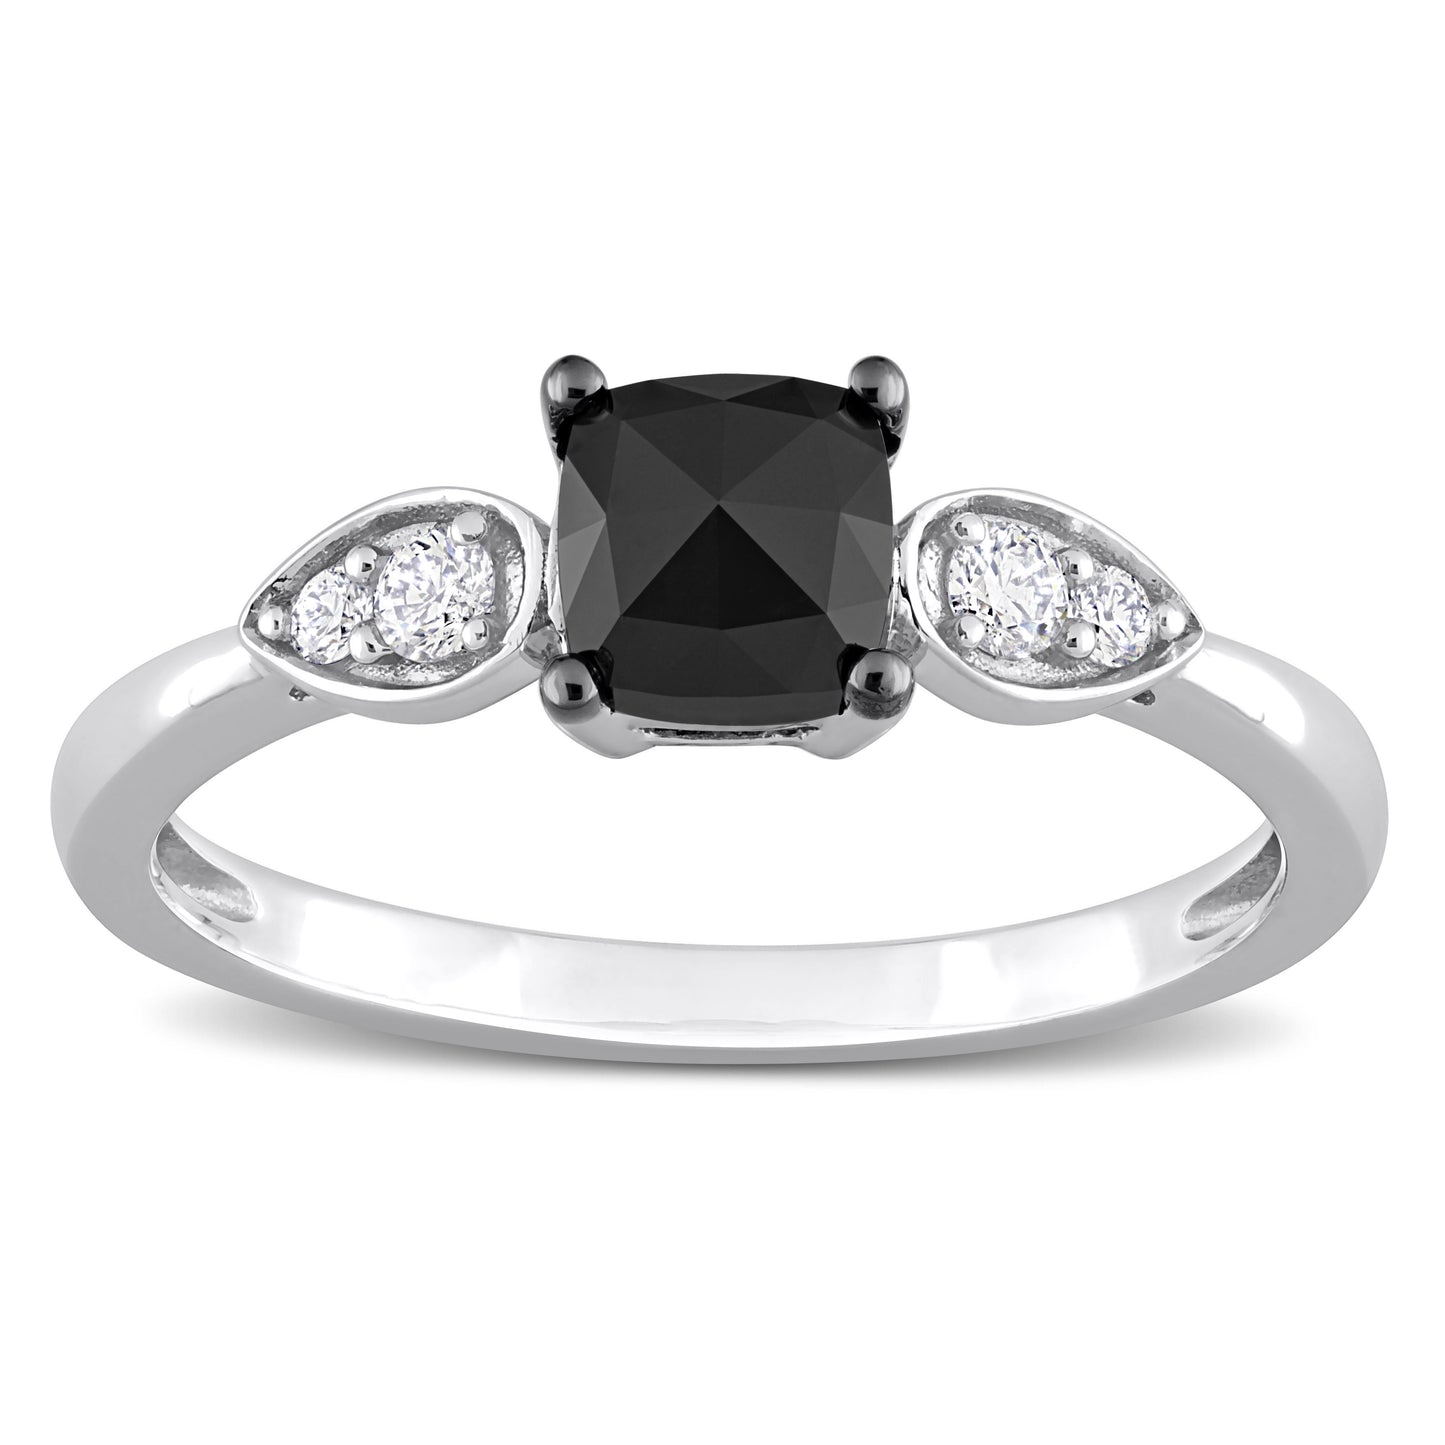 Cushion Cut Black and White Diamond Engagement Ring in 14k White Gold